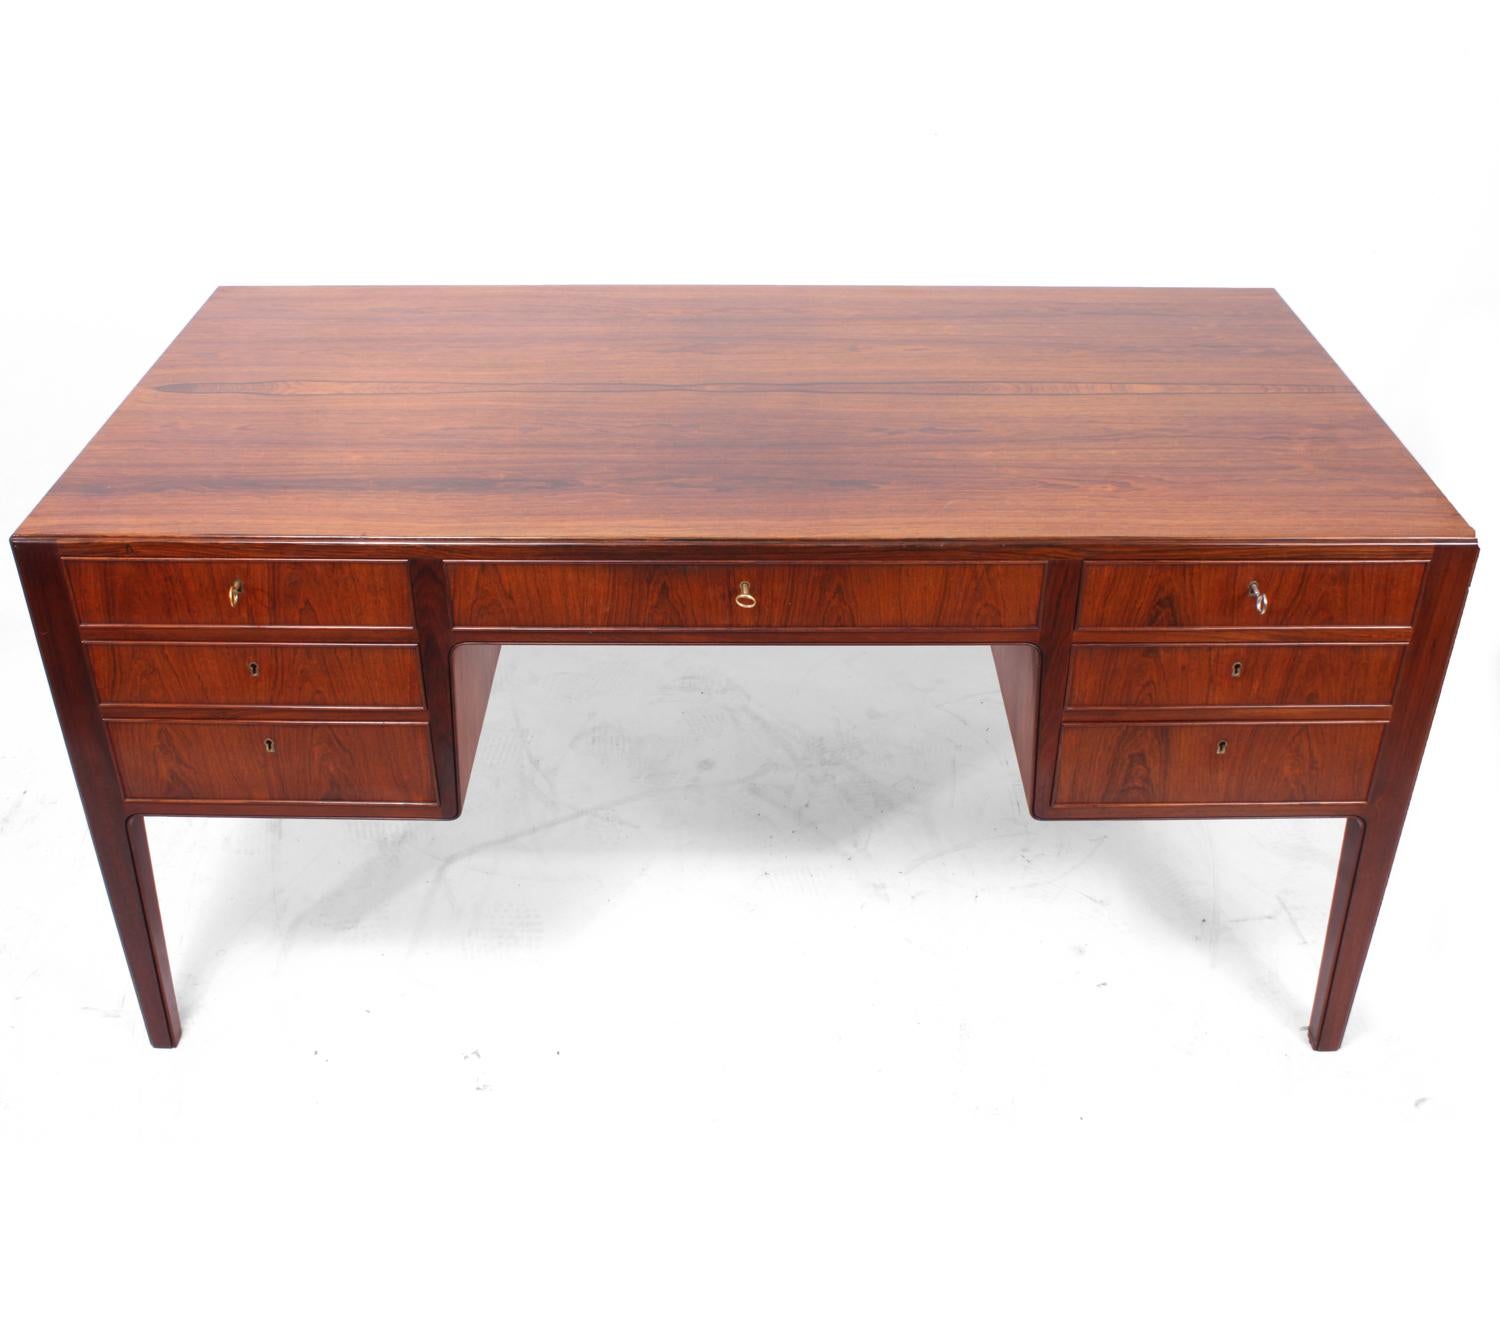 Midcentury rosewood desk Danish, circa 1950
A high quality Danish produced desk with seven drawers and two cupboards to the rear, the drawers are oak with hand cut dovetail and solid rosewood cockbead with inset locks the three keys supplied fit